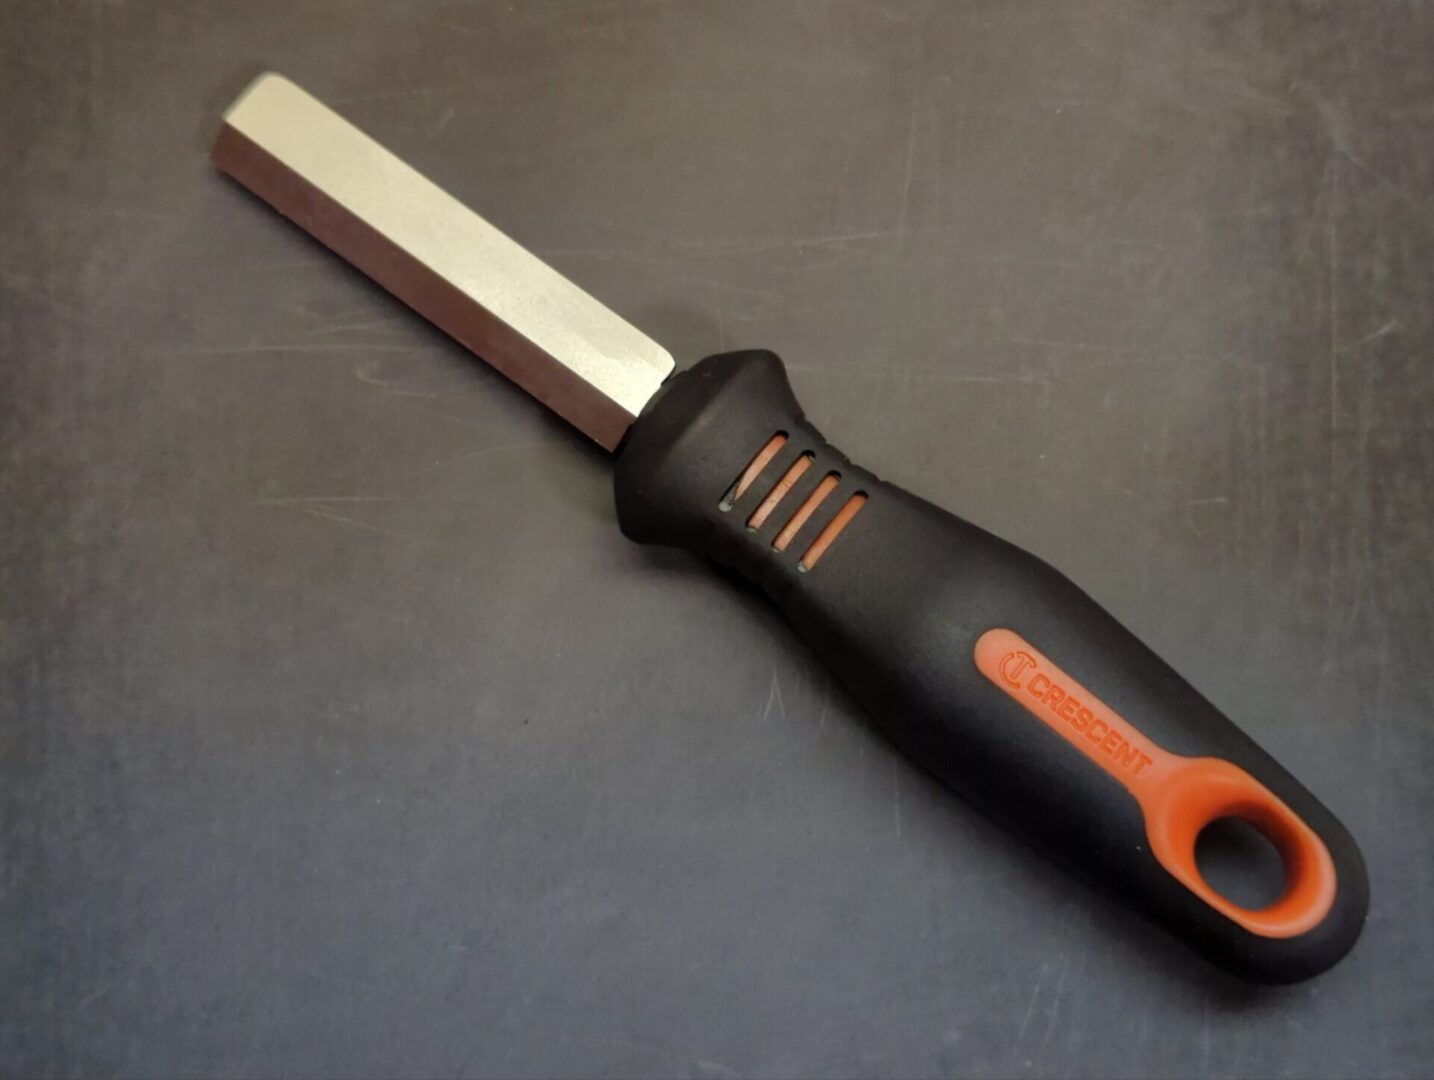 A Knife (Right-handed) with an orange handle on a black surface.